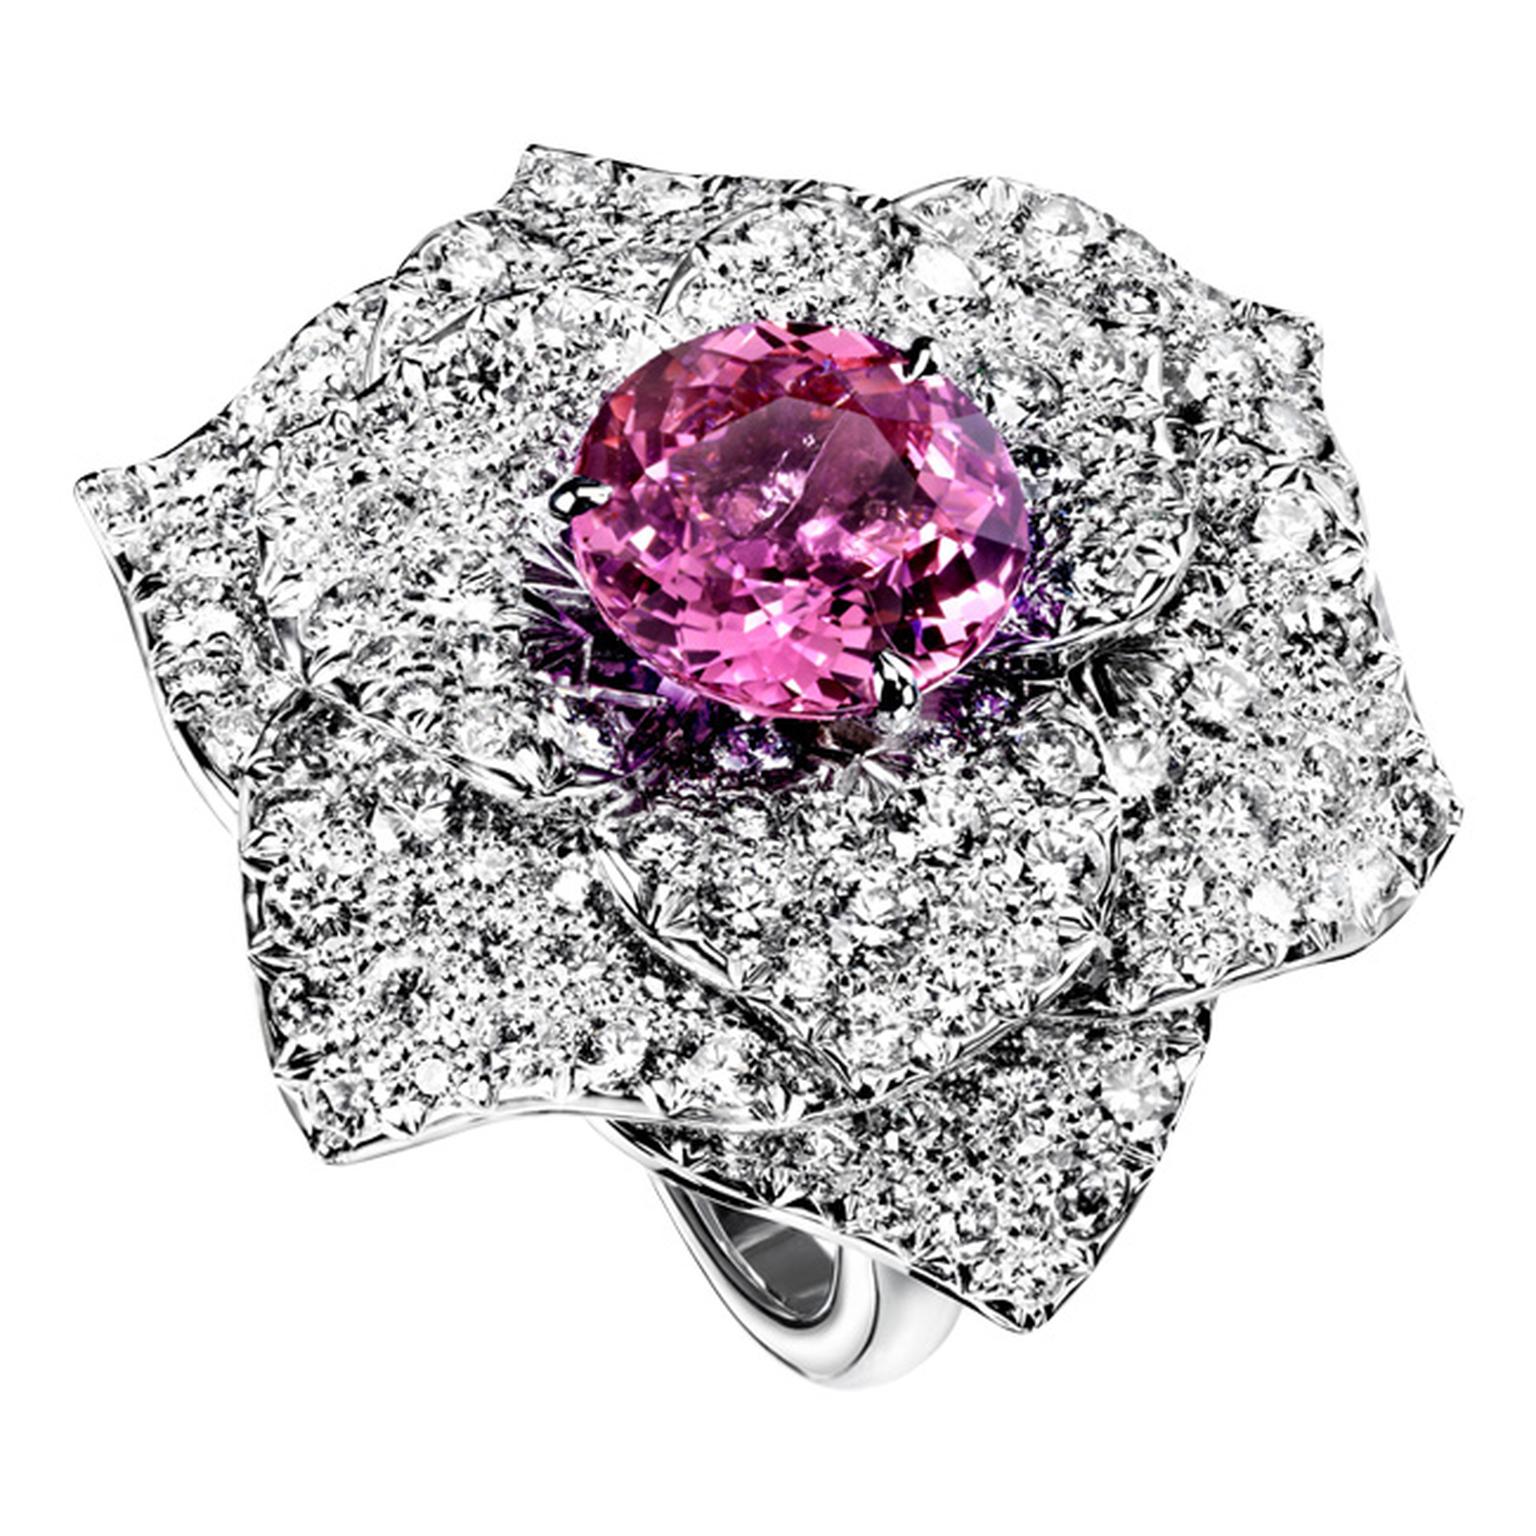 Piaget Limelight Garden Party Rose Ring_20131205_Main